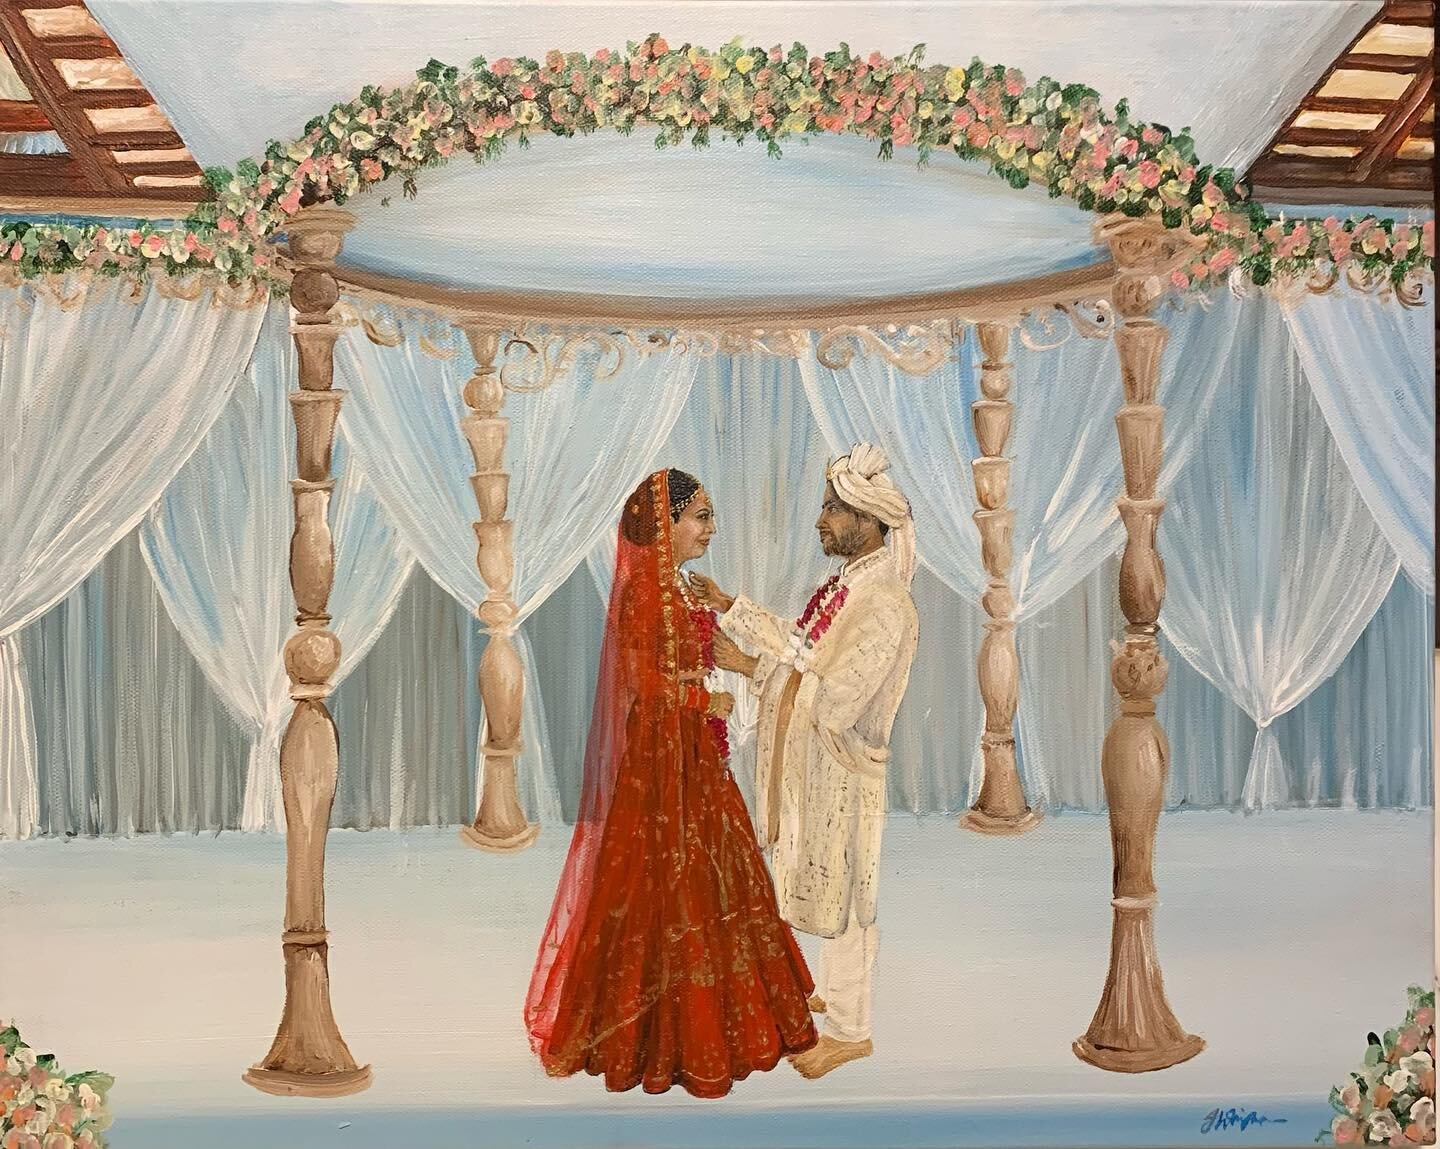 Live wedding painting: 
Priya and Ravi 

This weekend&rsquo;s painting was a surprise for the couple from p_varma13 brothers. 

The couple had no idea I was painting until they saw me during the ceremony! 

It was a really beautiful day filled with l